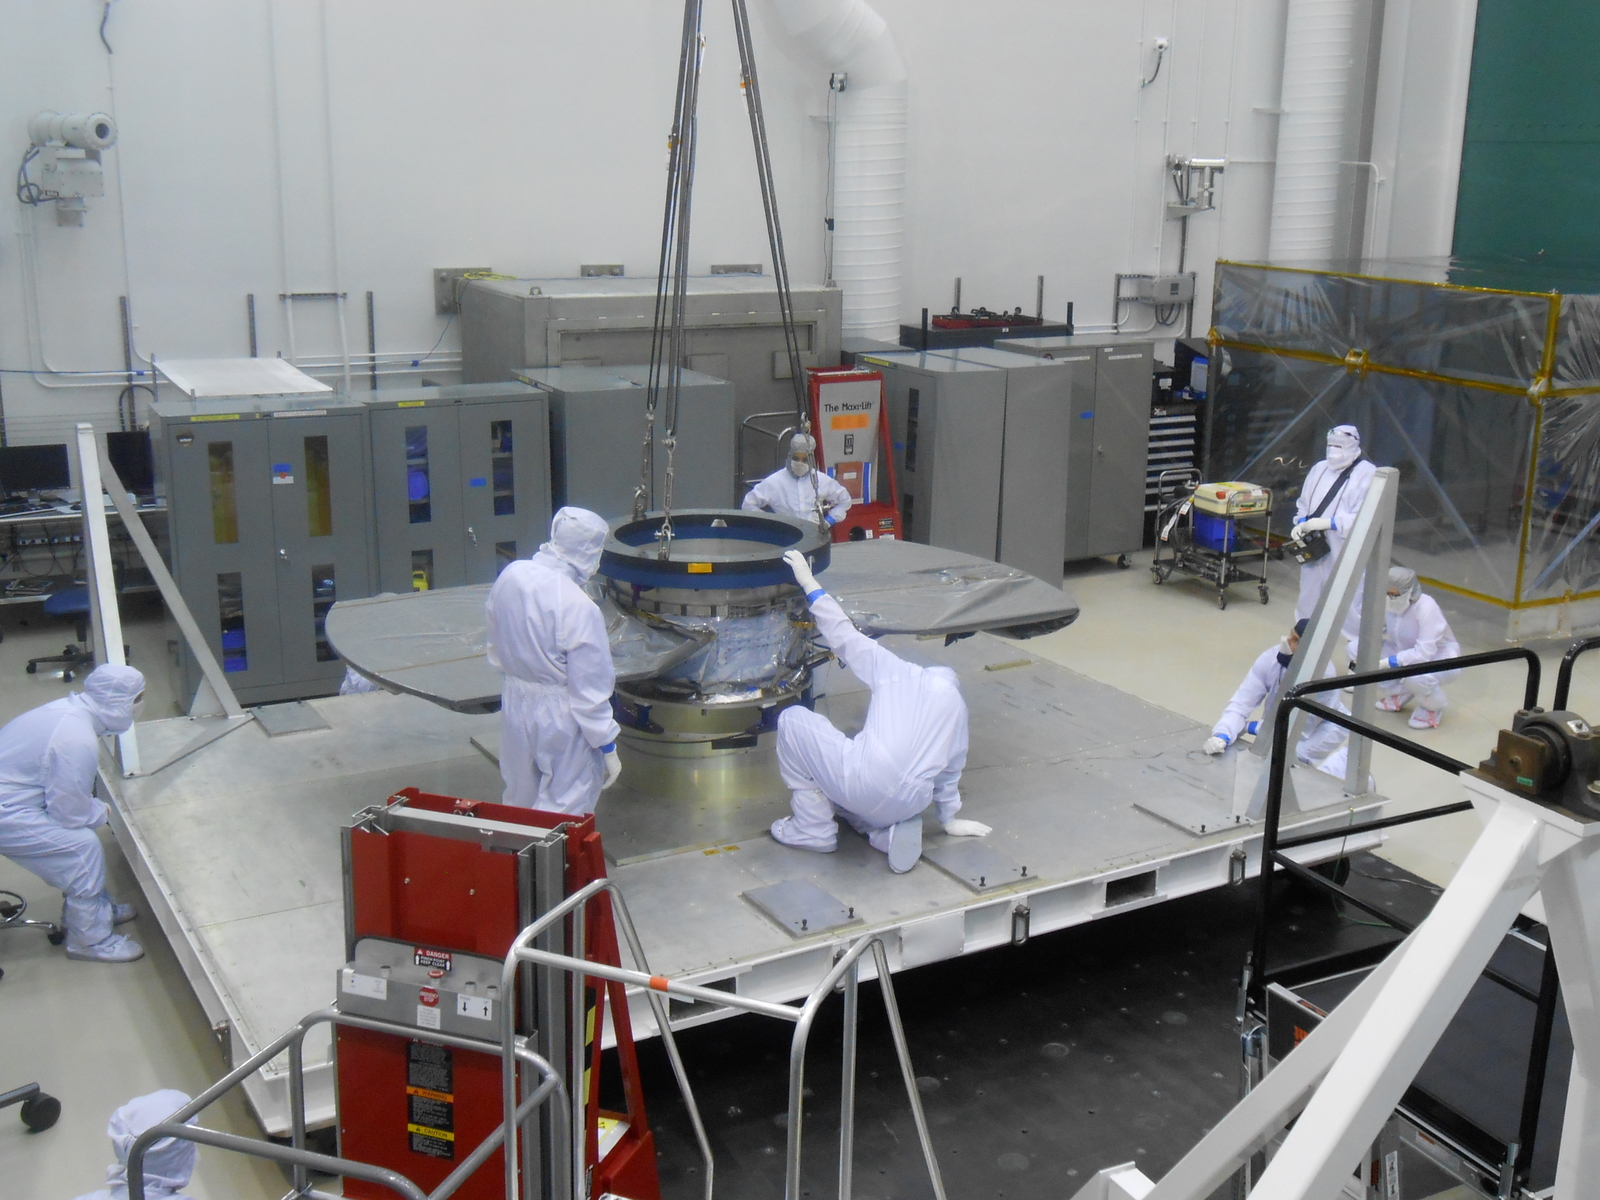 Lockheed Martin spacecraft specialists check the cruise stage of NASA's InSight spacecraft in this June 22, 2017, photo. The cruise stage will provide vital functions during the flight from Earth to Mars, and then will be jettisoned before the rest of the spacecraft enters Mars' atmosphere.